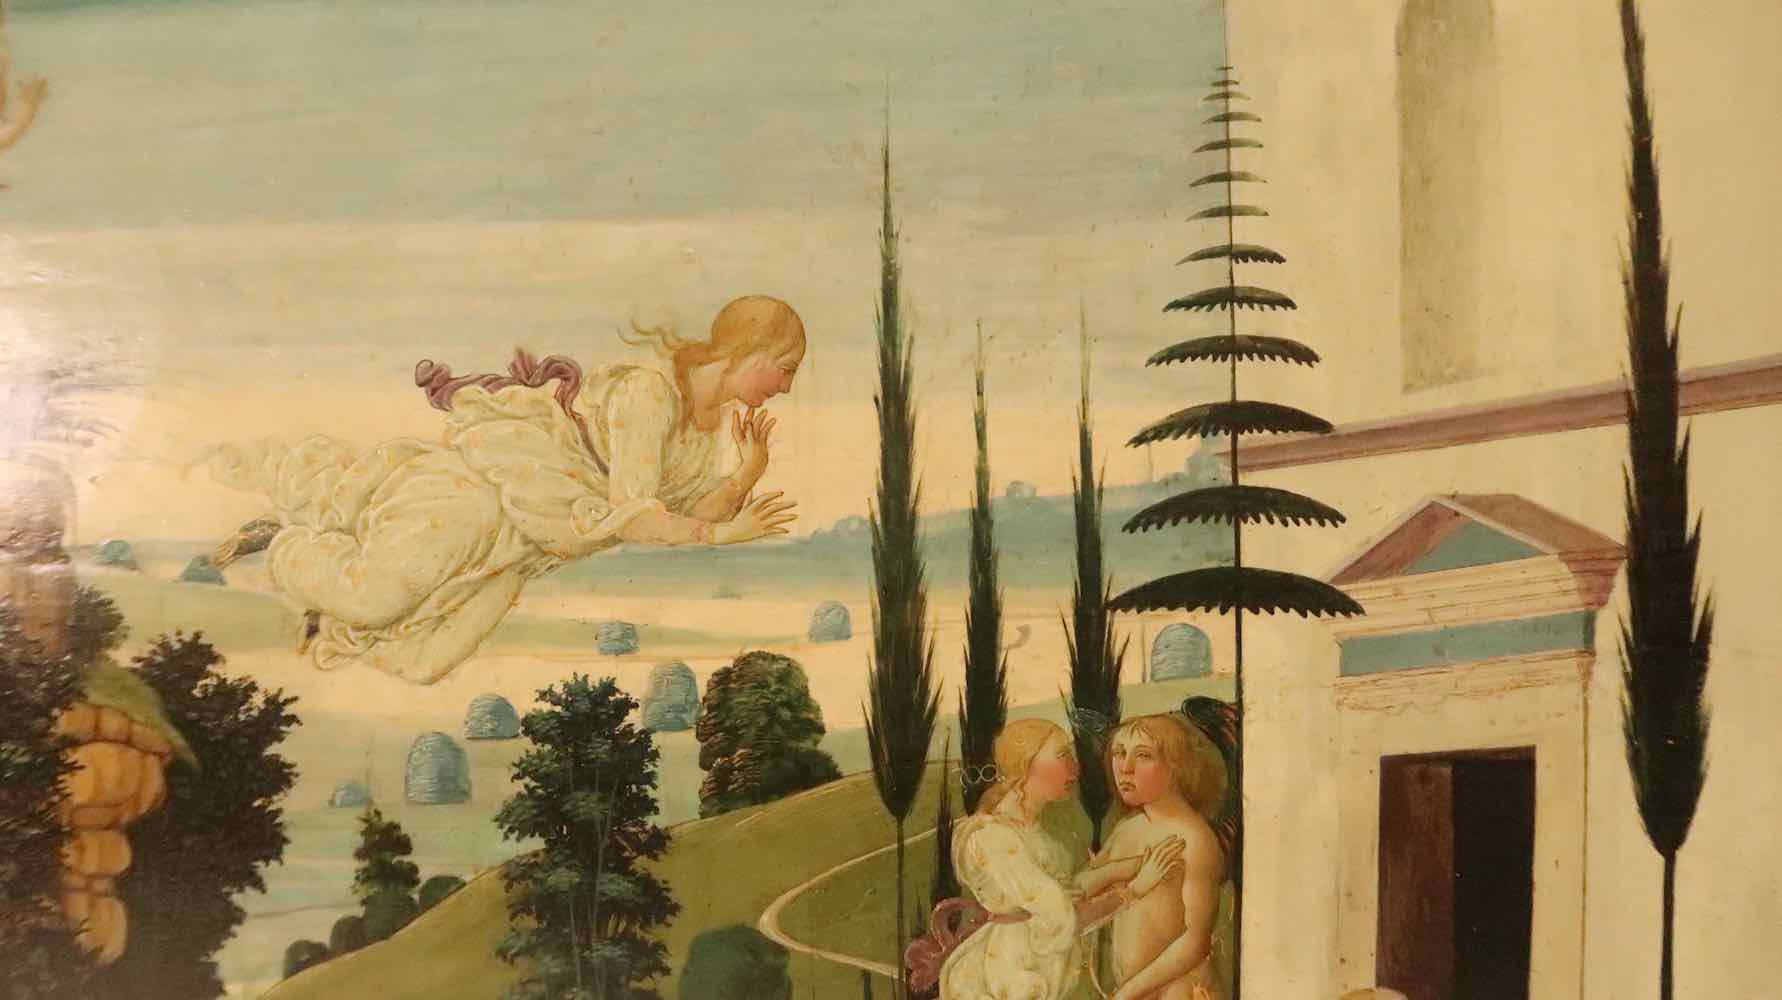 Psyche is blown off the hill by Zephyrus the wind - a detail in a painting by Del Sellaio of Cupid and Psyche painted in 1473